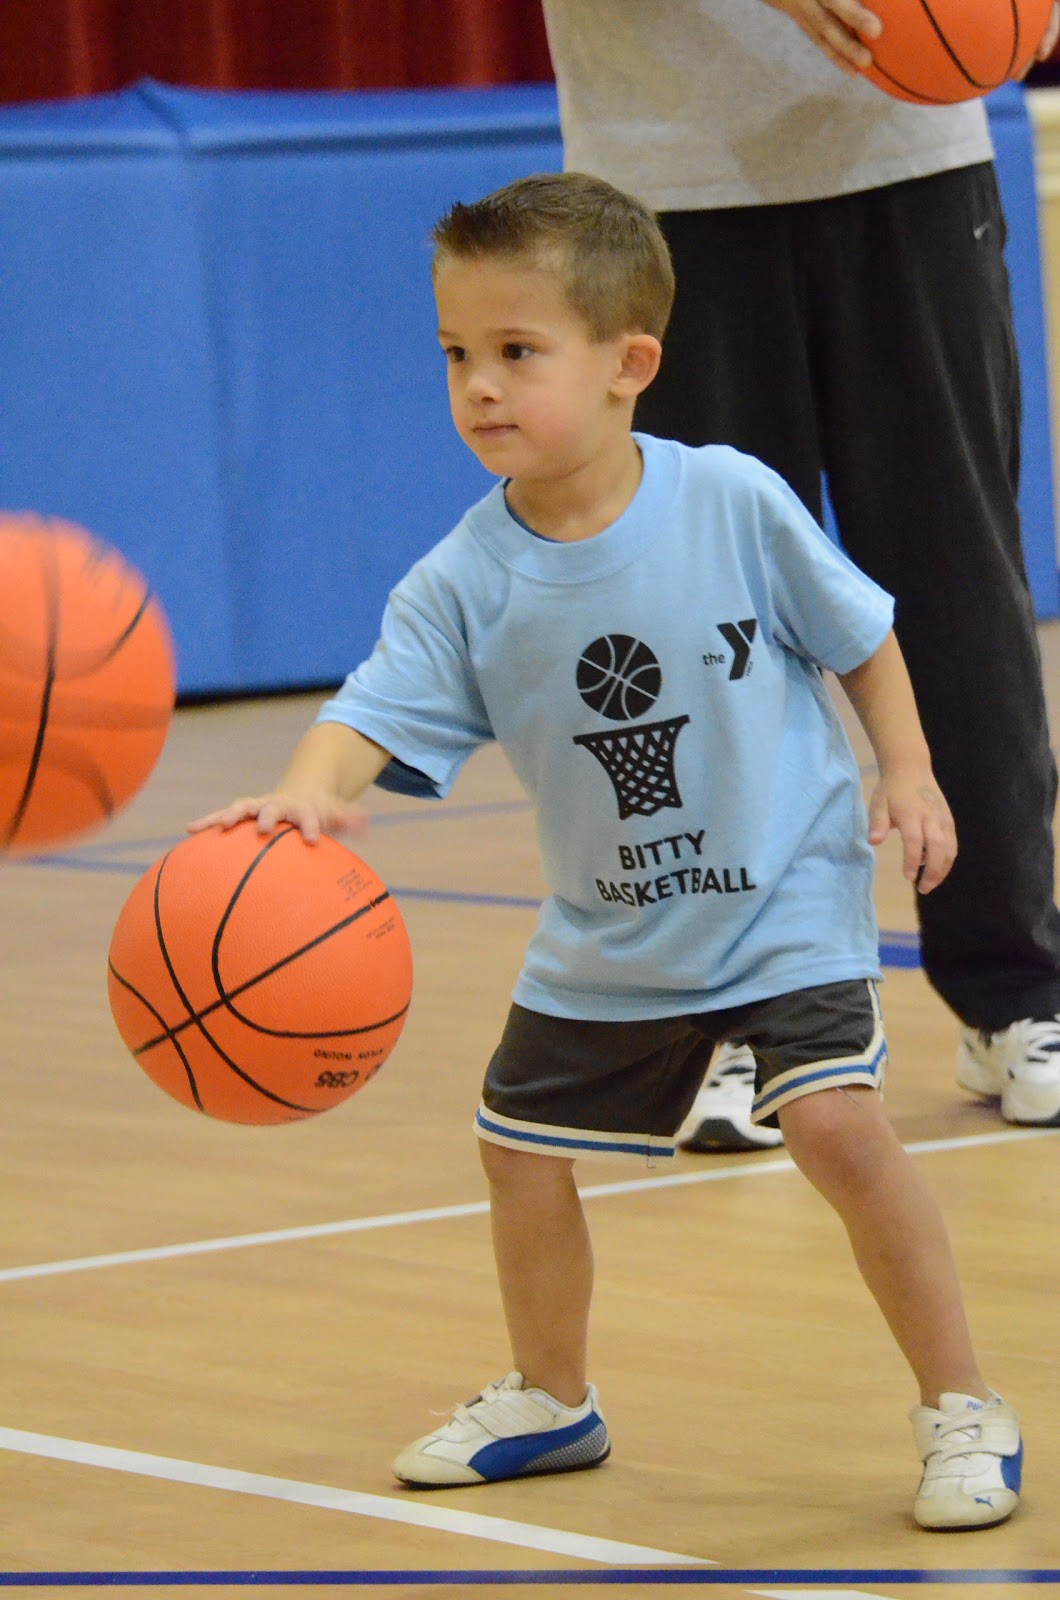 The Vernon Blog: Connor's first basketball practice - Bitty Basketball